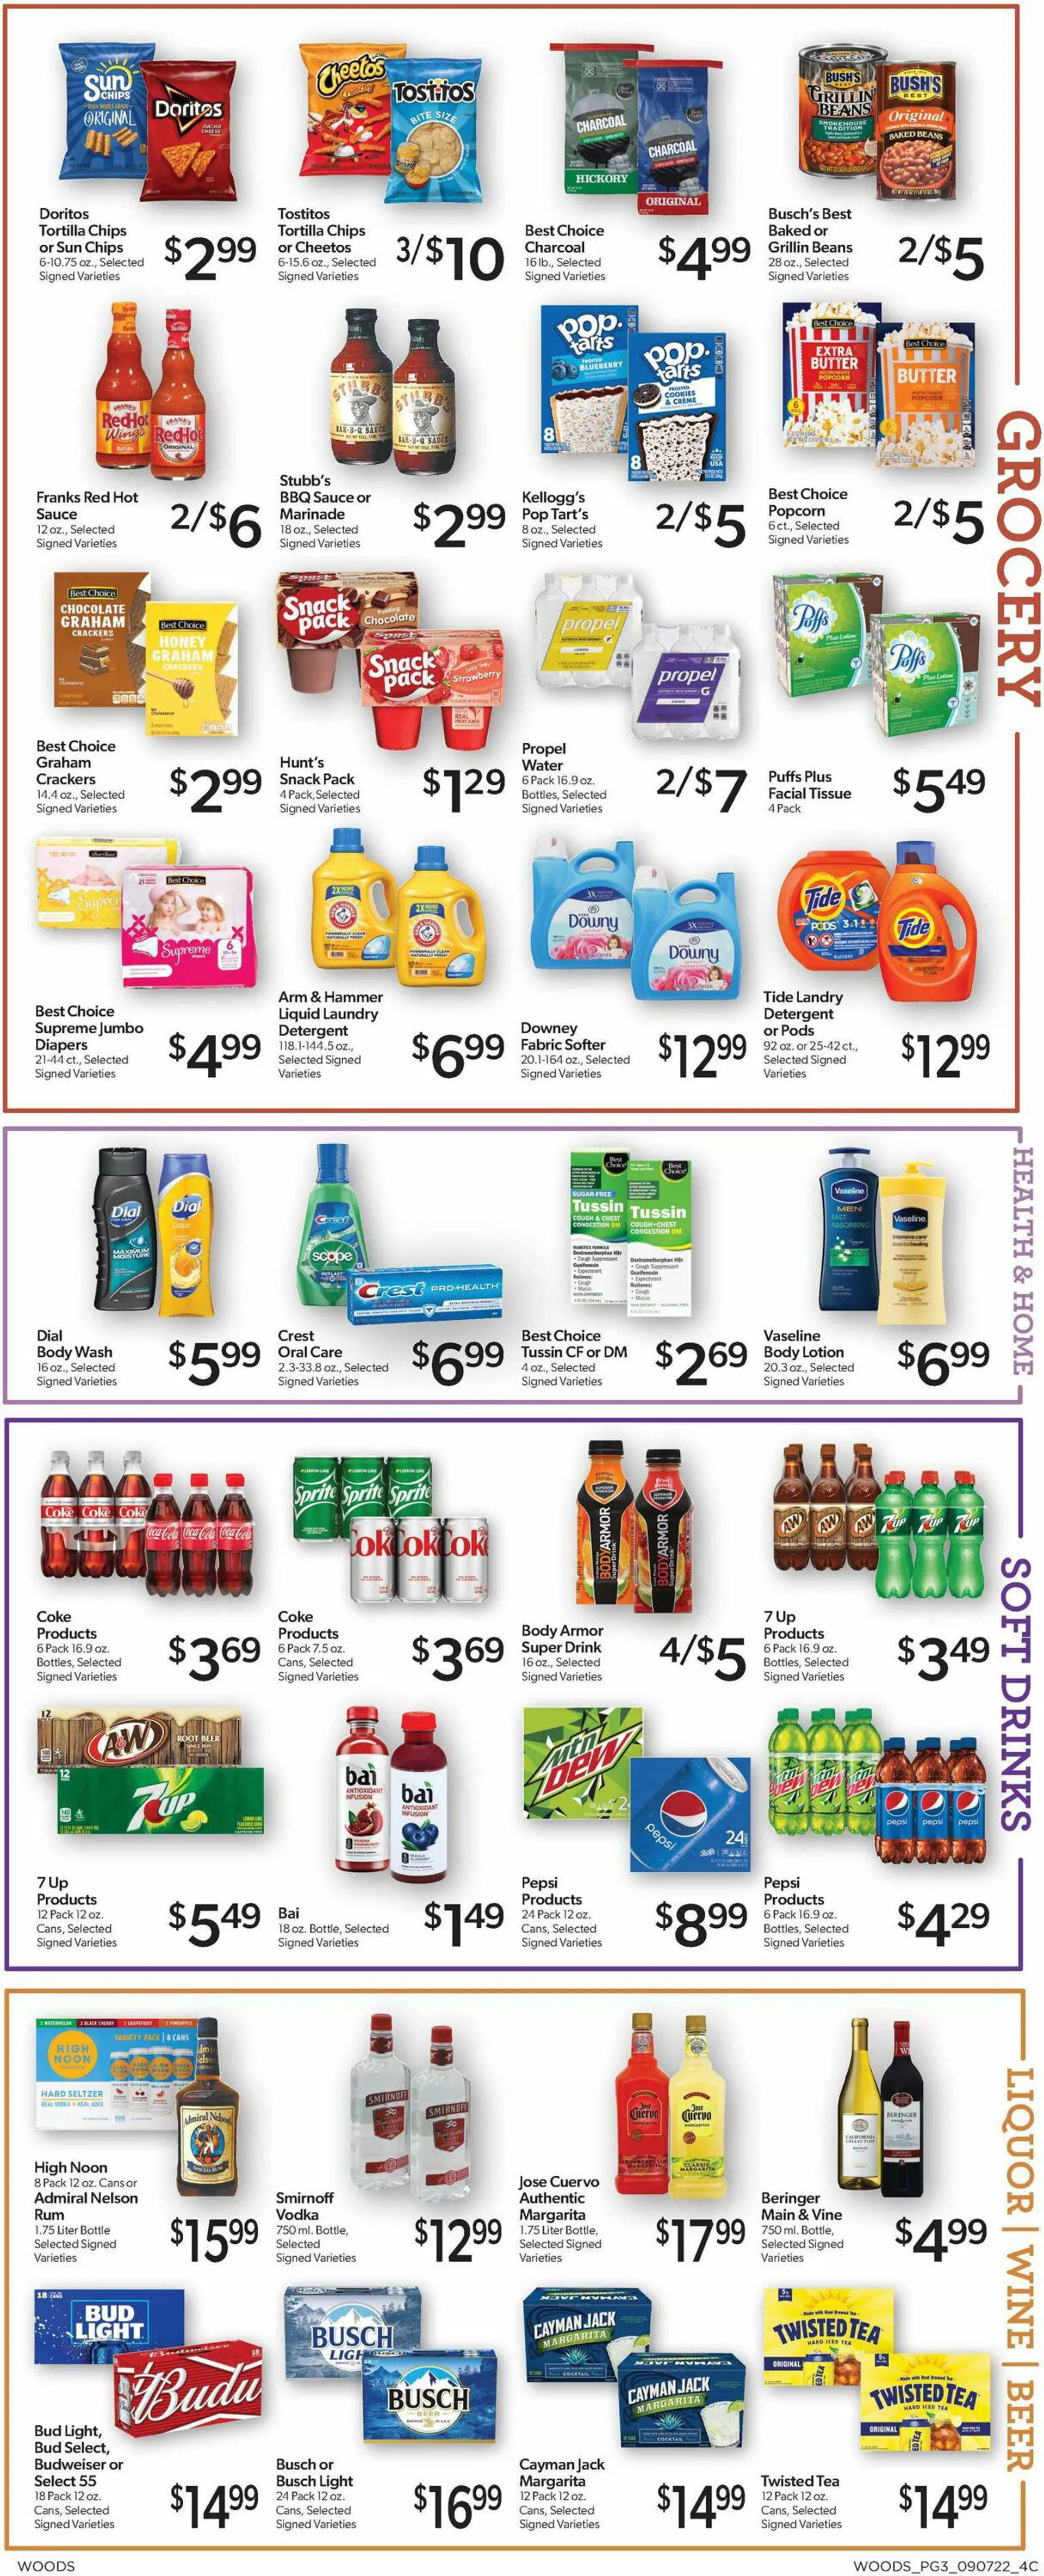 Woods Supermarket Current weekly ad - 3